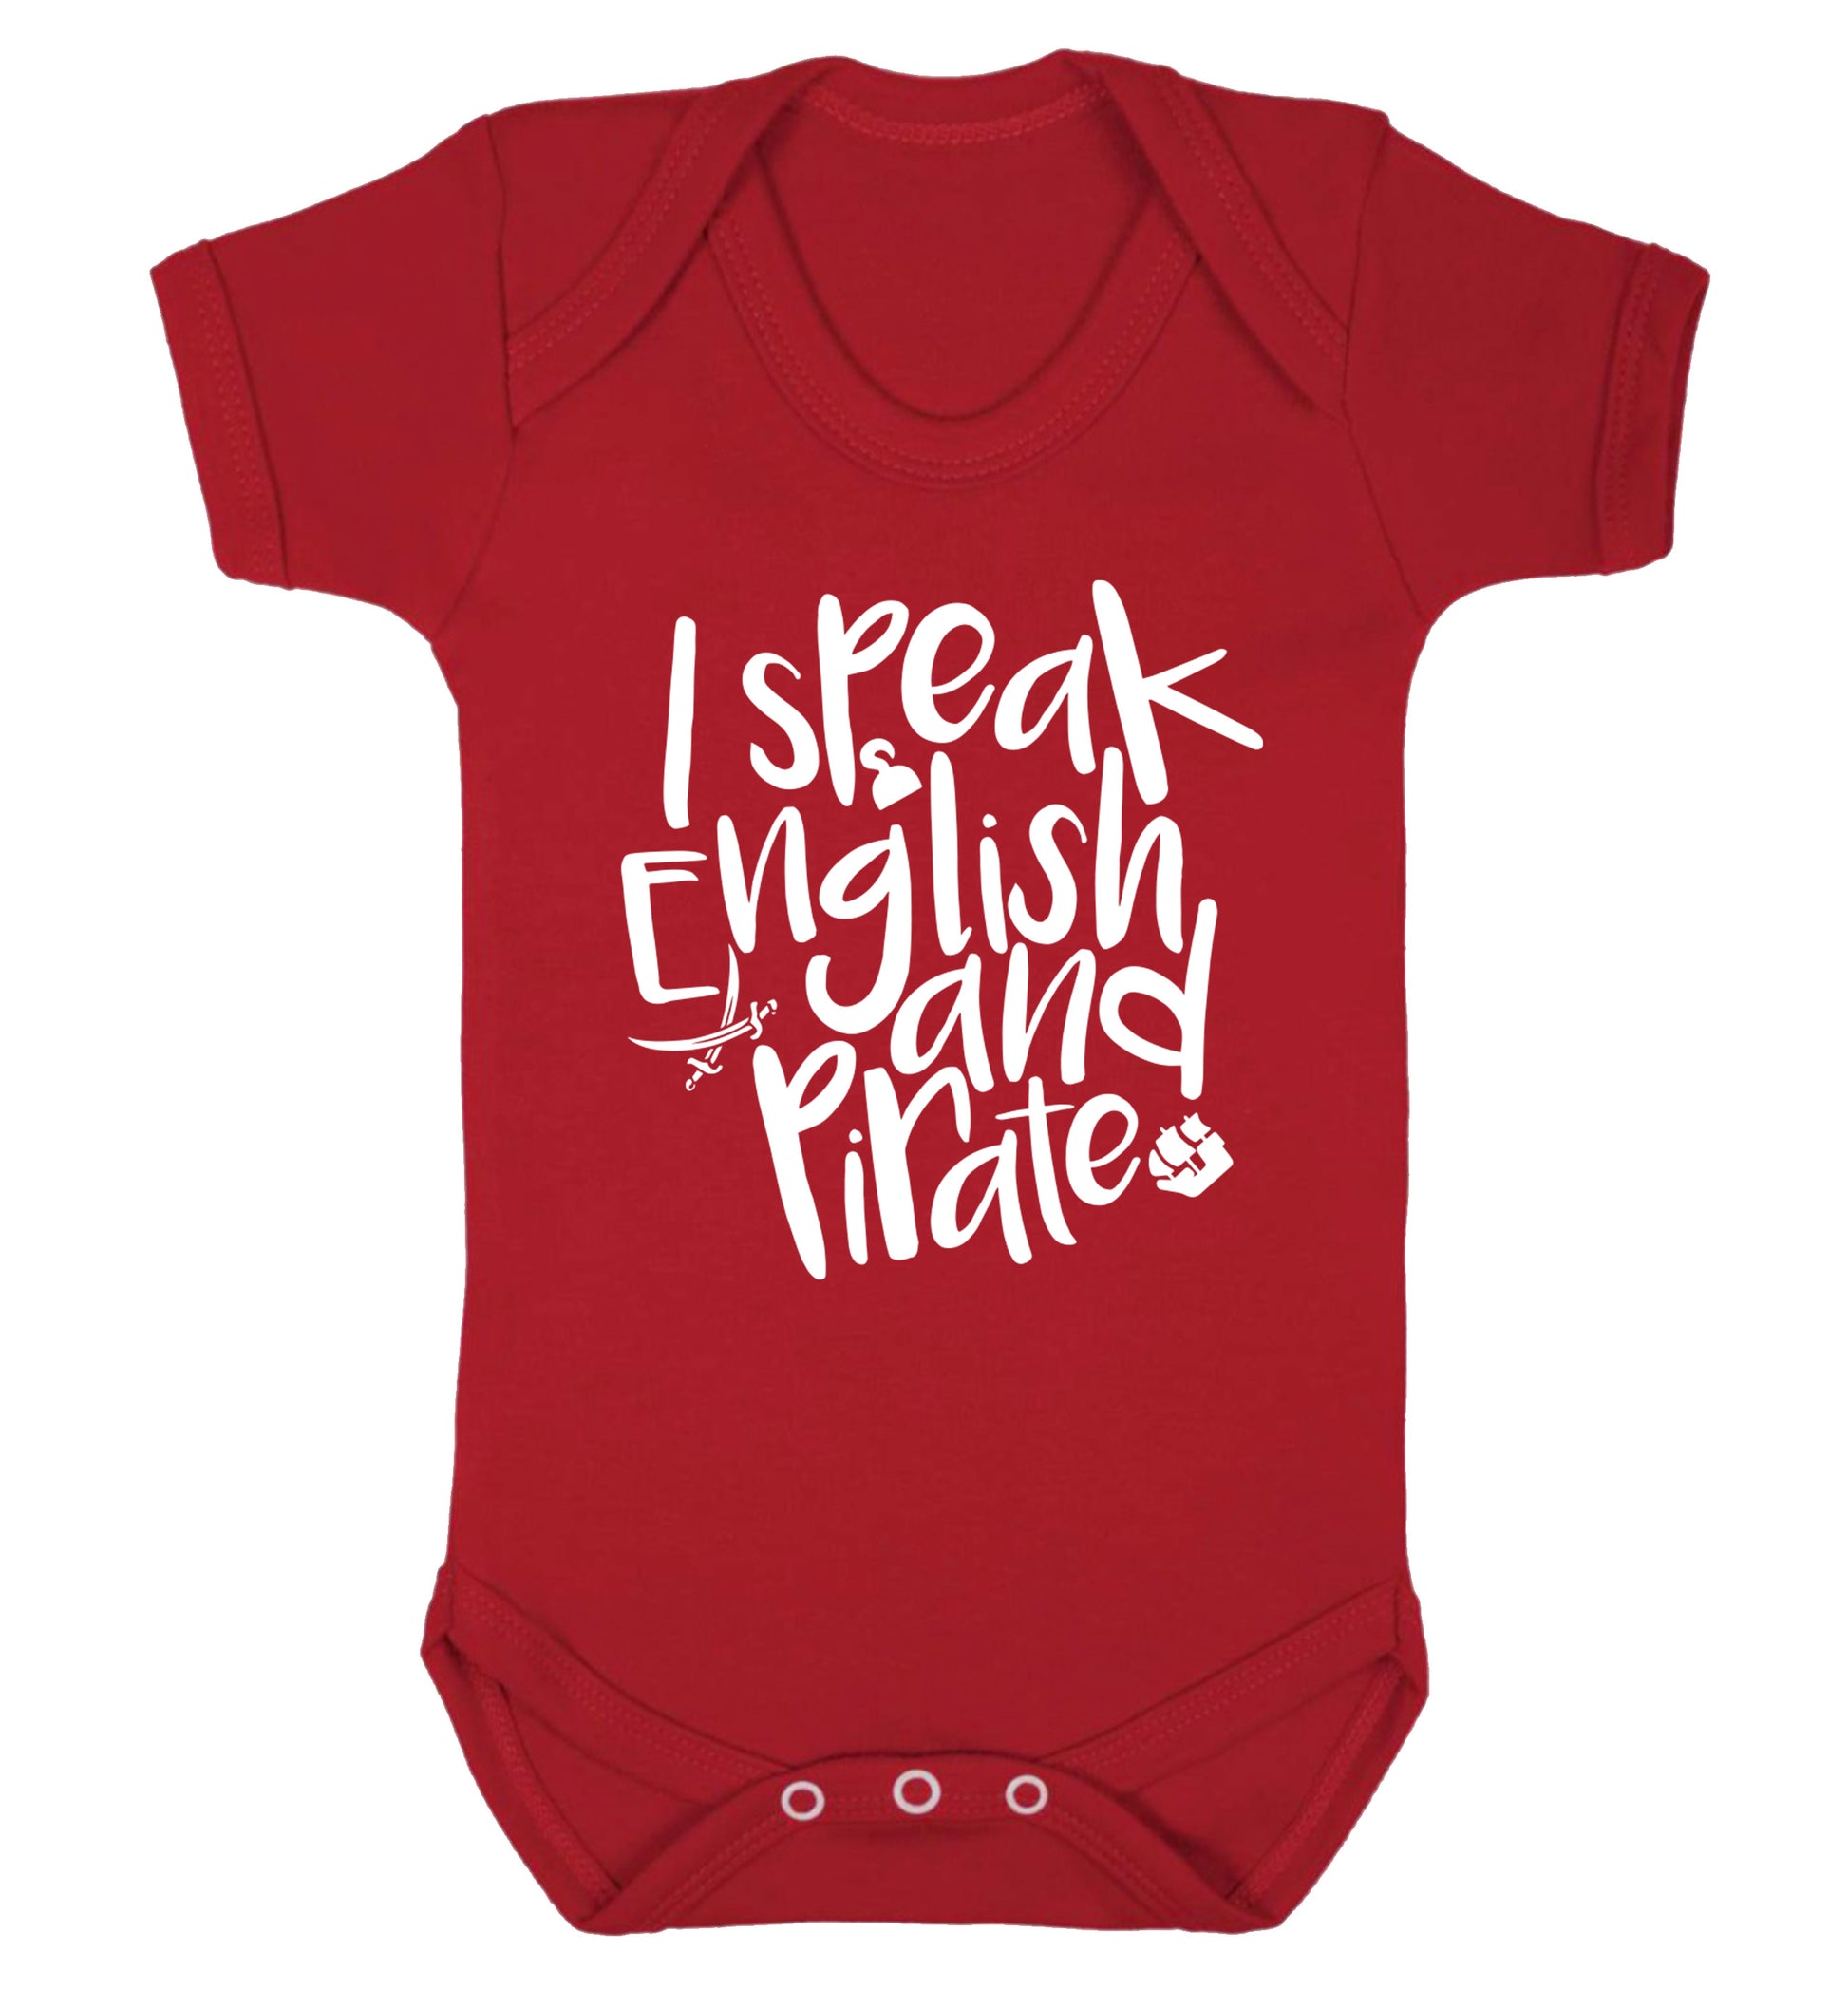 I speak English and pirate Baby Vest red 18-24 months